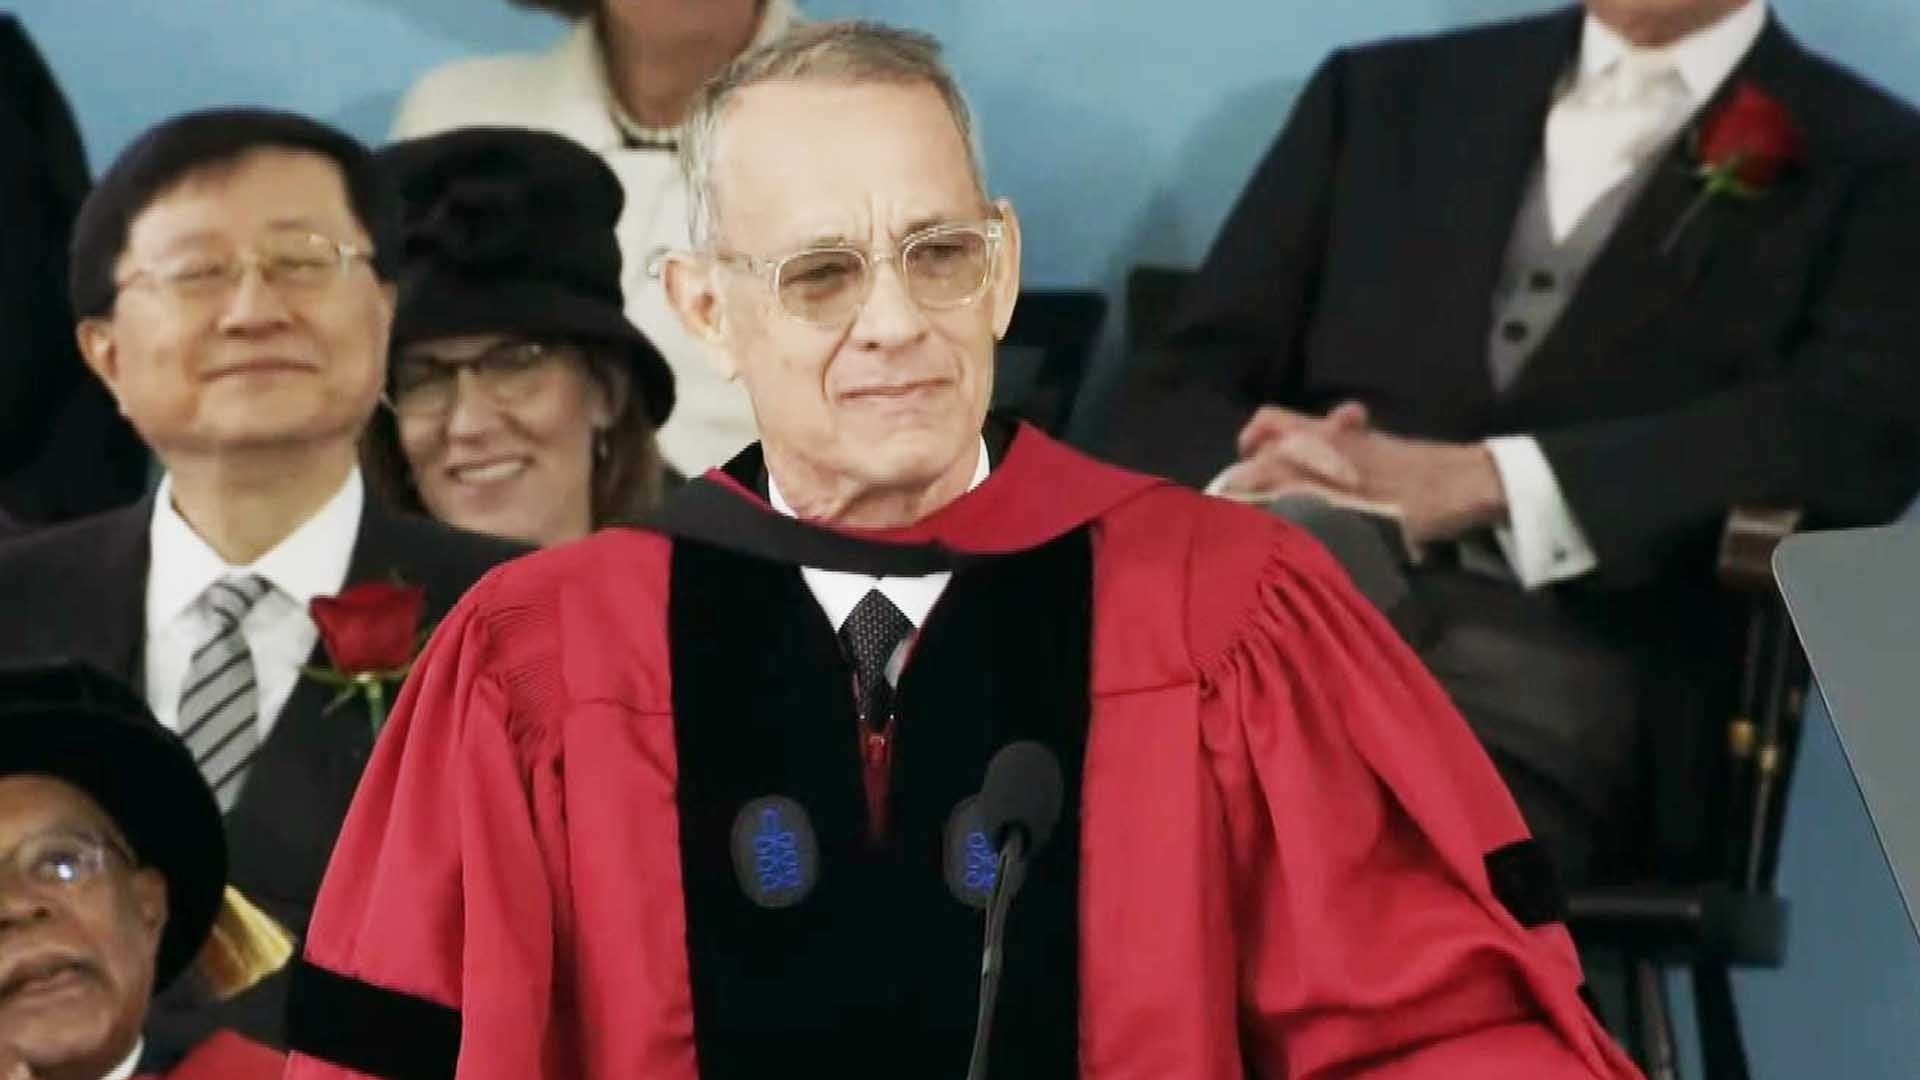 Tom Hanks Delivers Harvard Commencement Speech Filled With Gems 